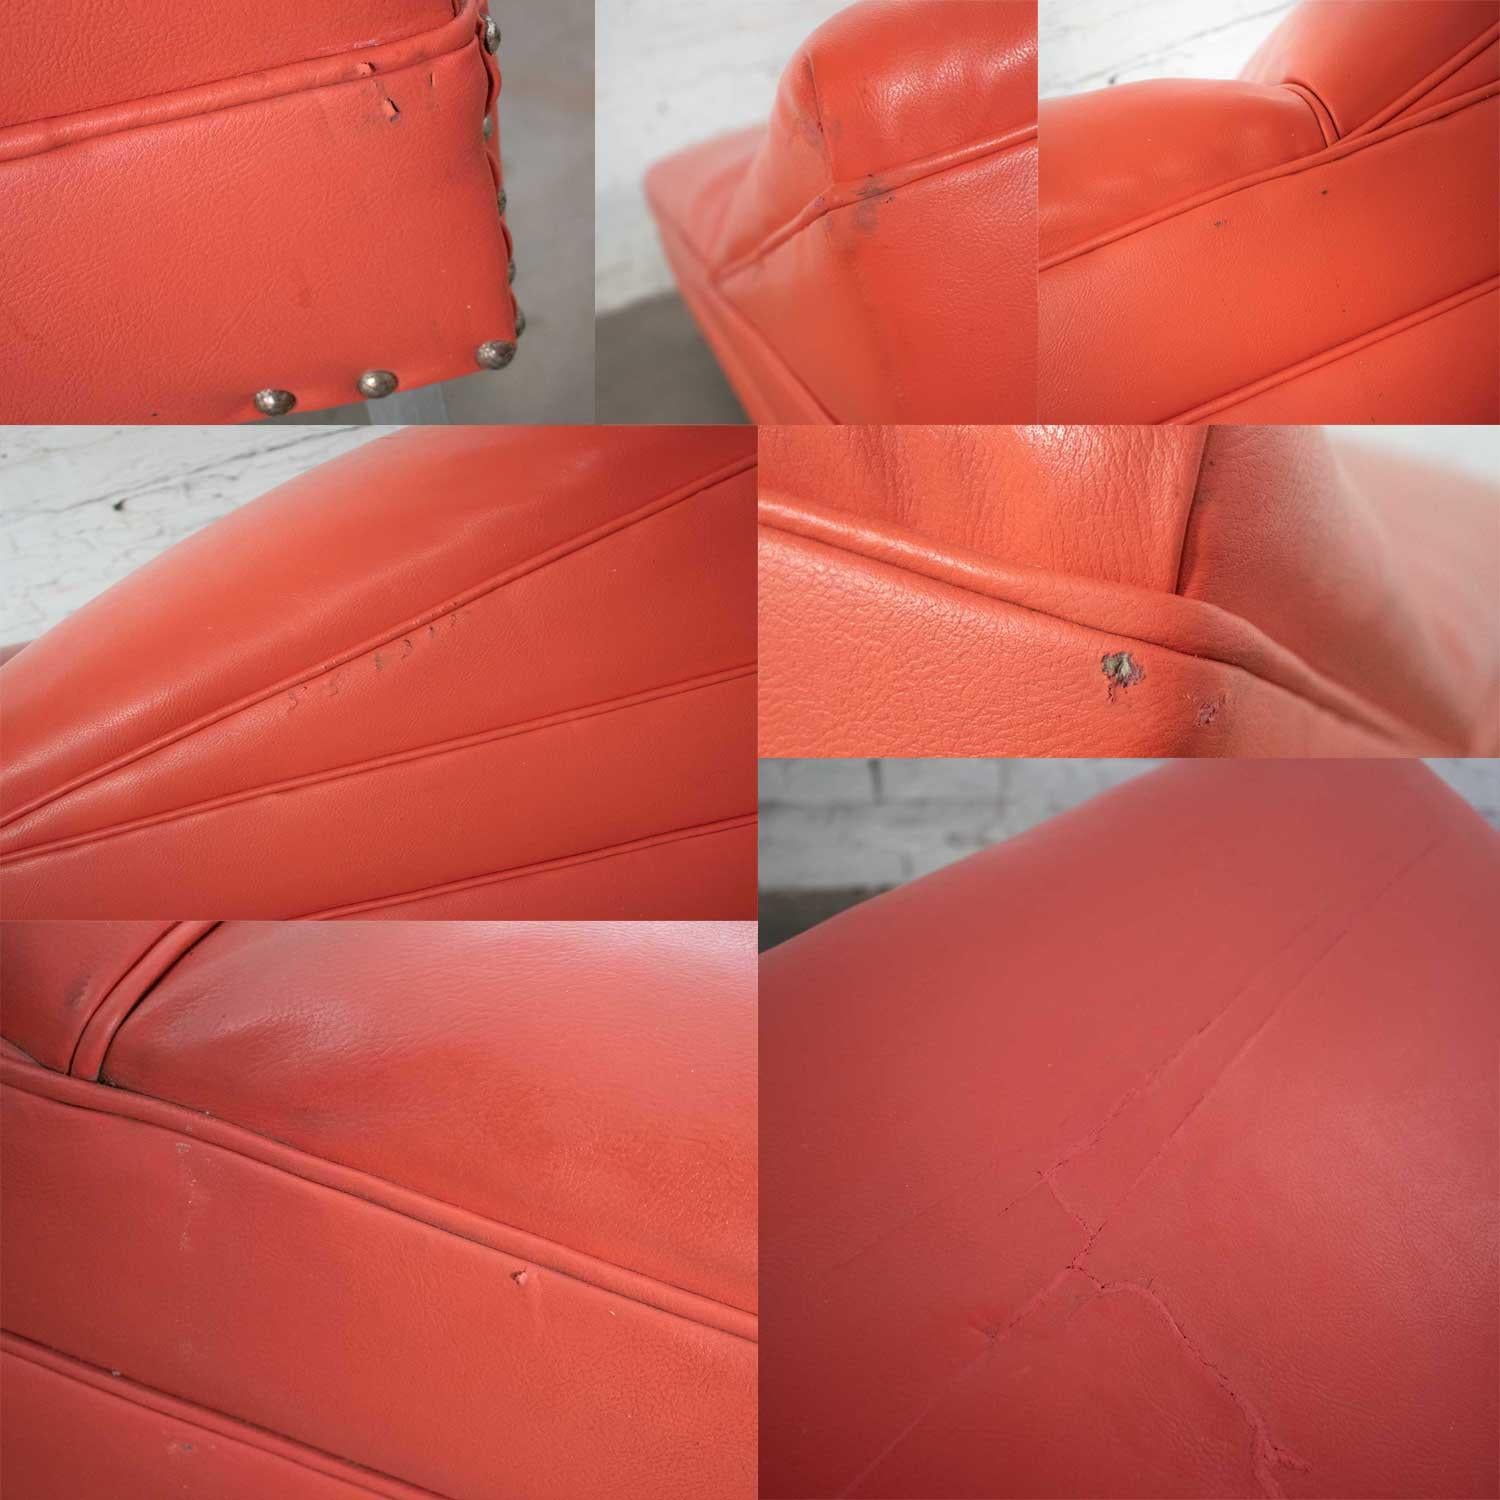 Mid-Century Modern Chaise or Day Bed in Coral Vinyl Faux Leather Aluminum Legs For Sale 5